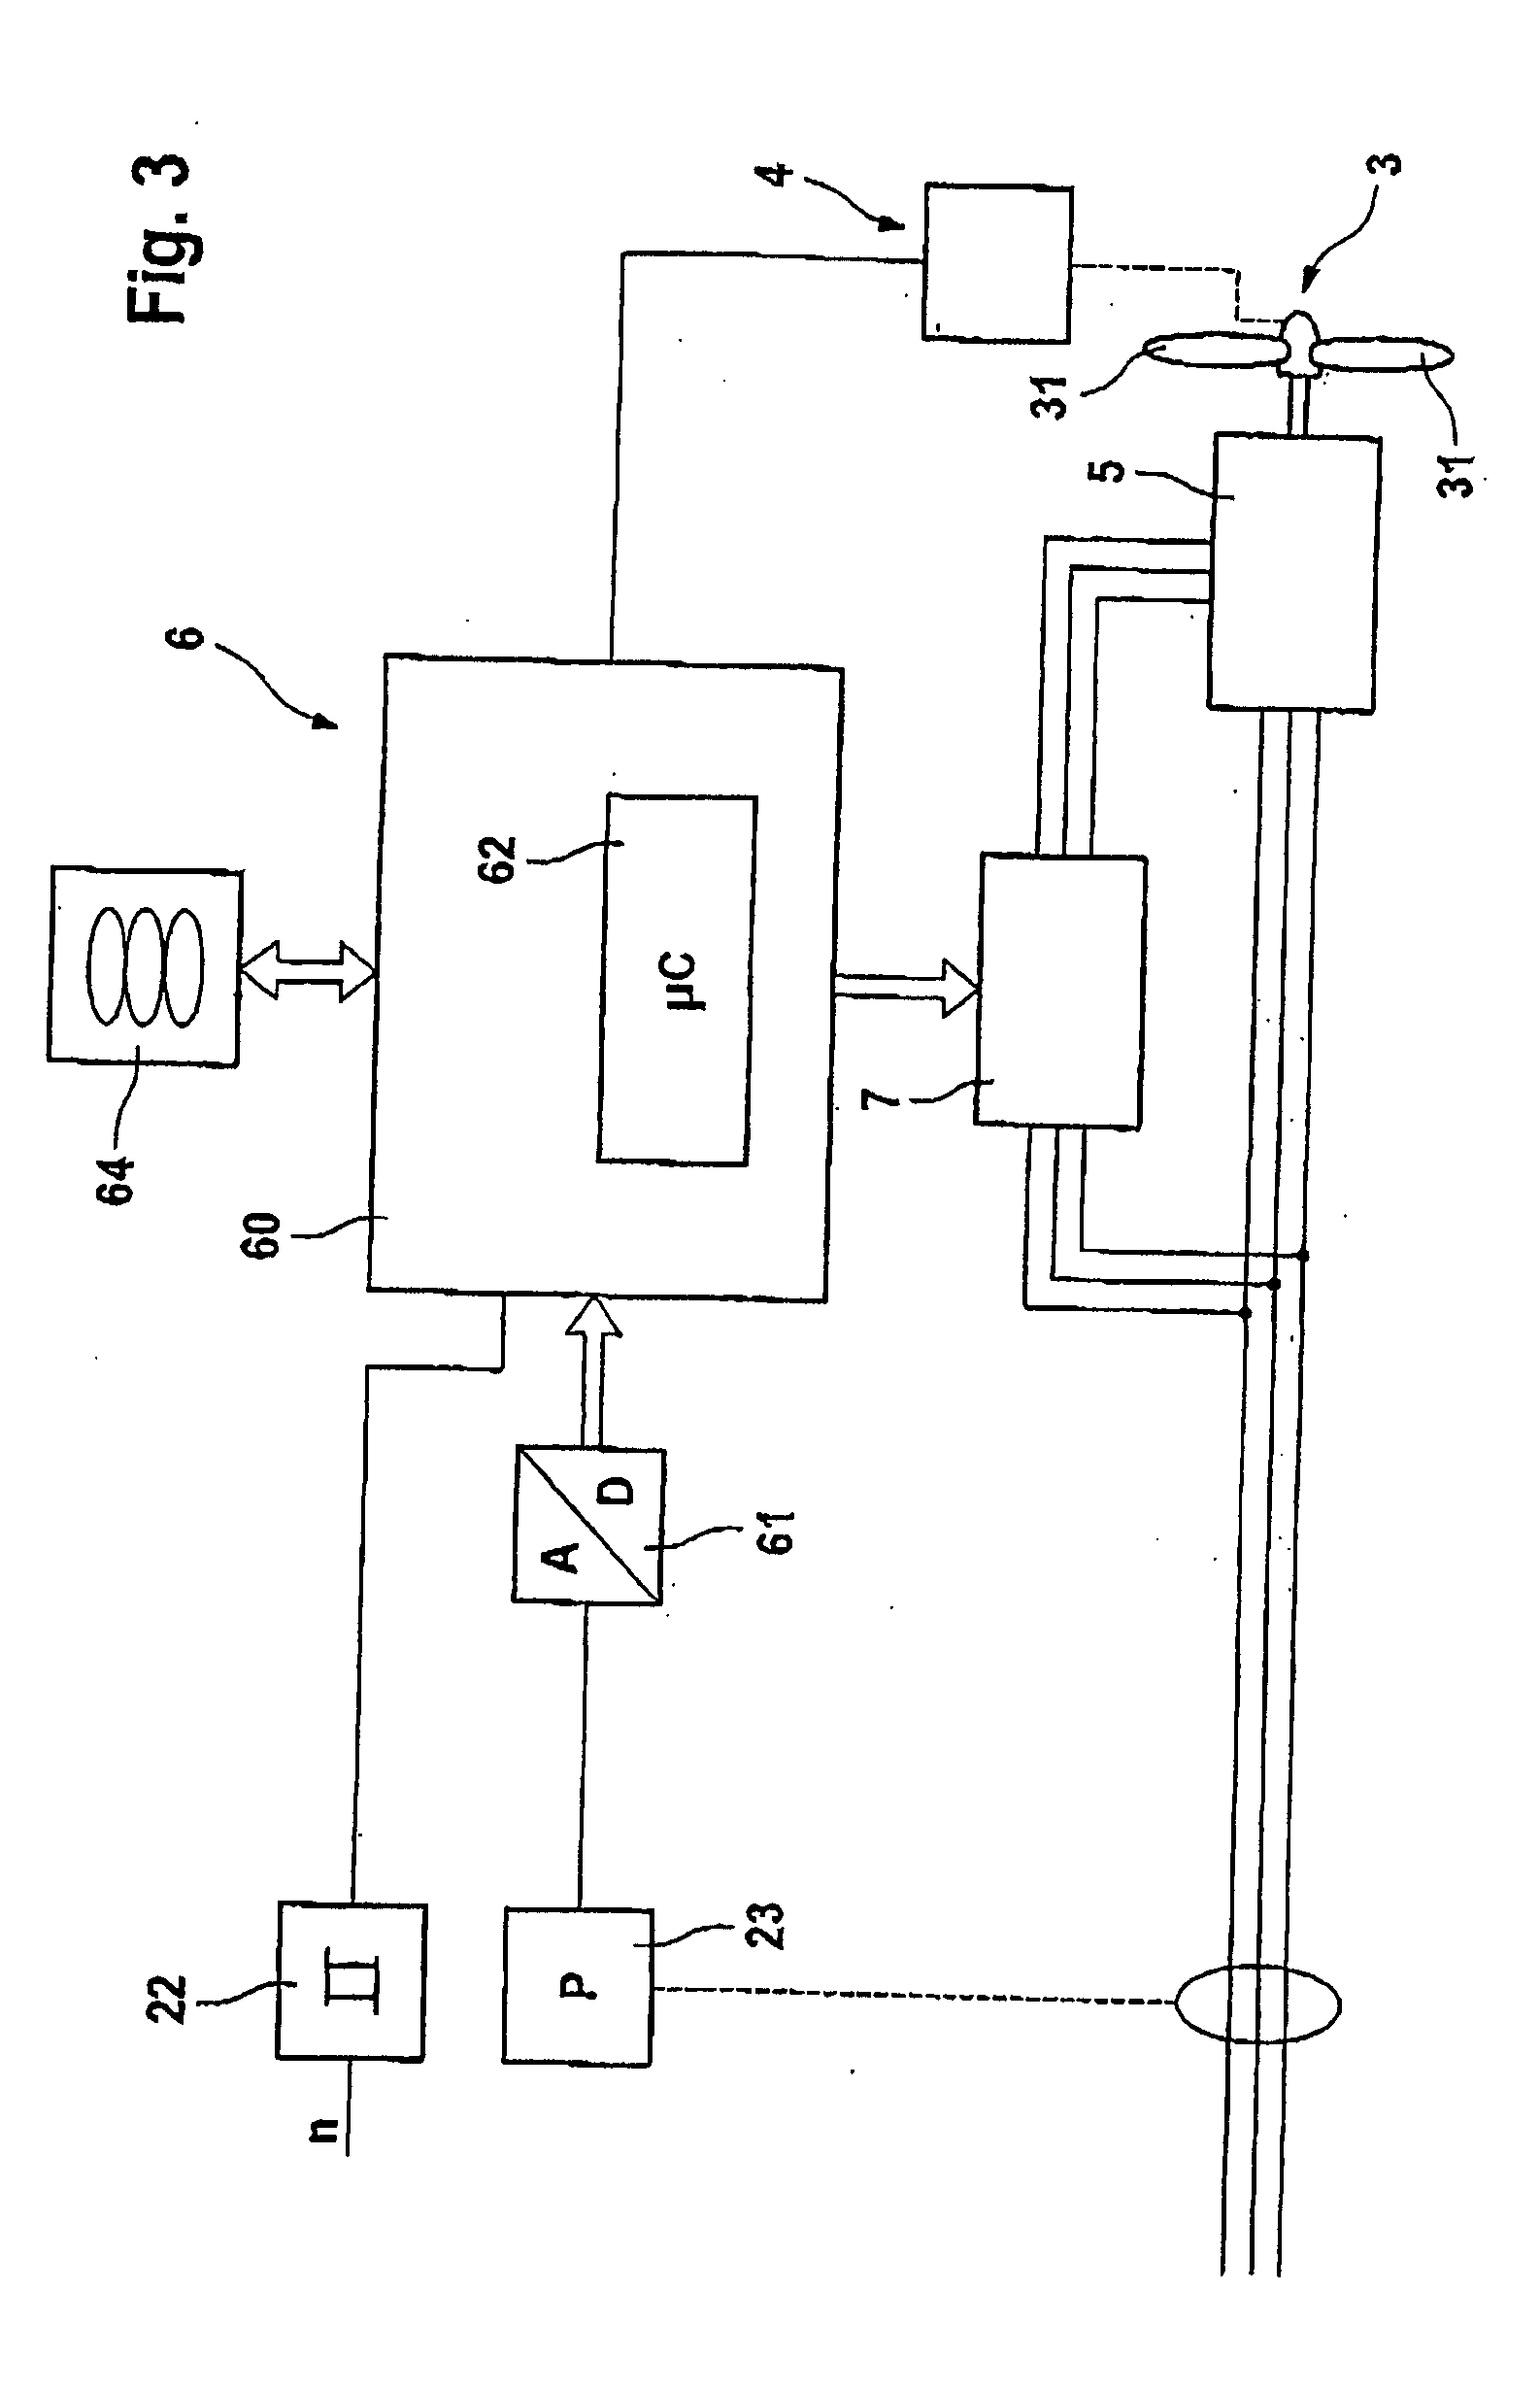 Method for Optimizing Operational Parameters on Wind Farms